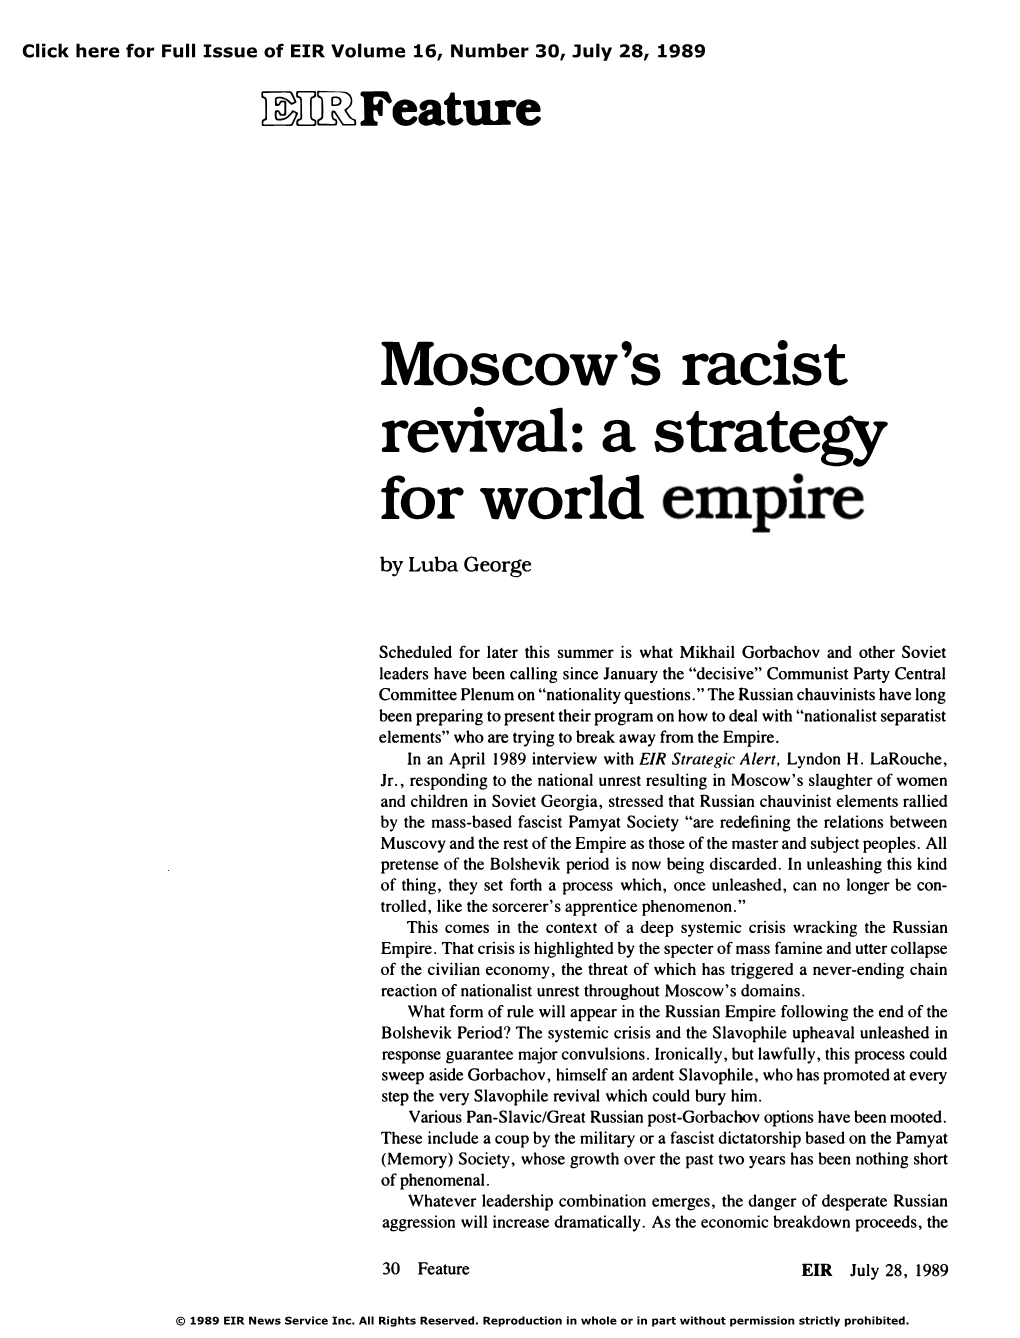 Moscow's Racist Revival: a Strategy for World Empire